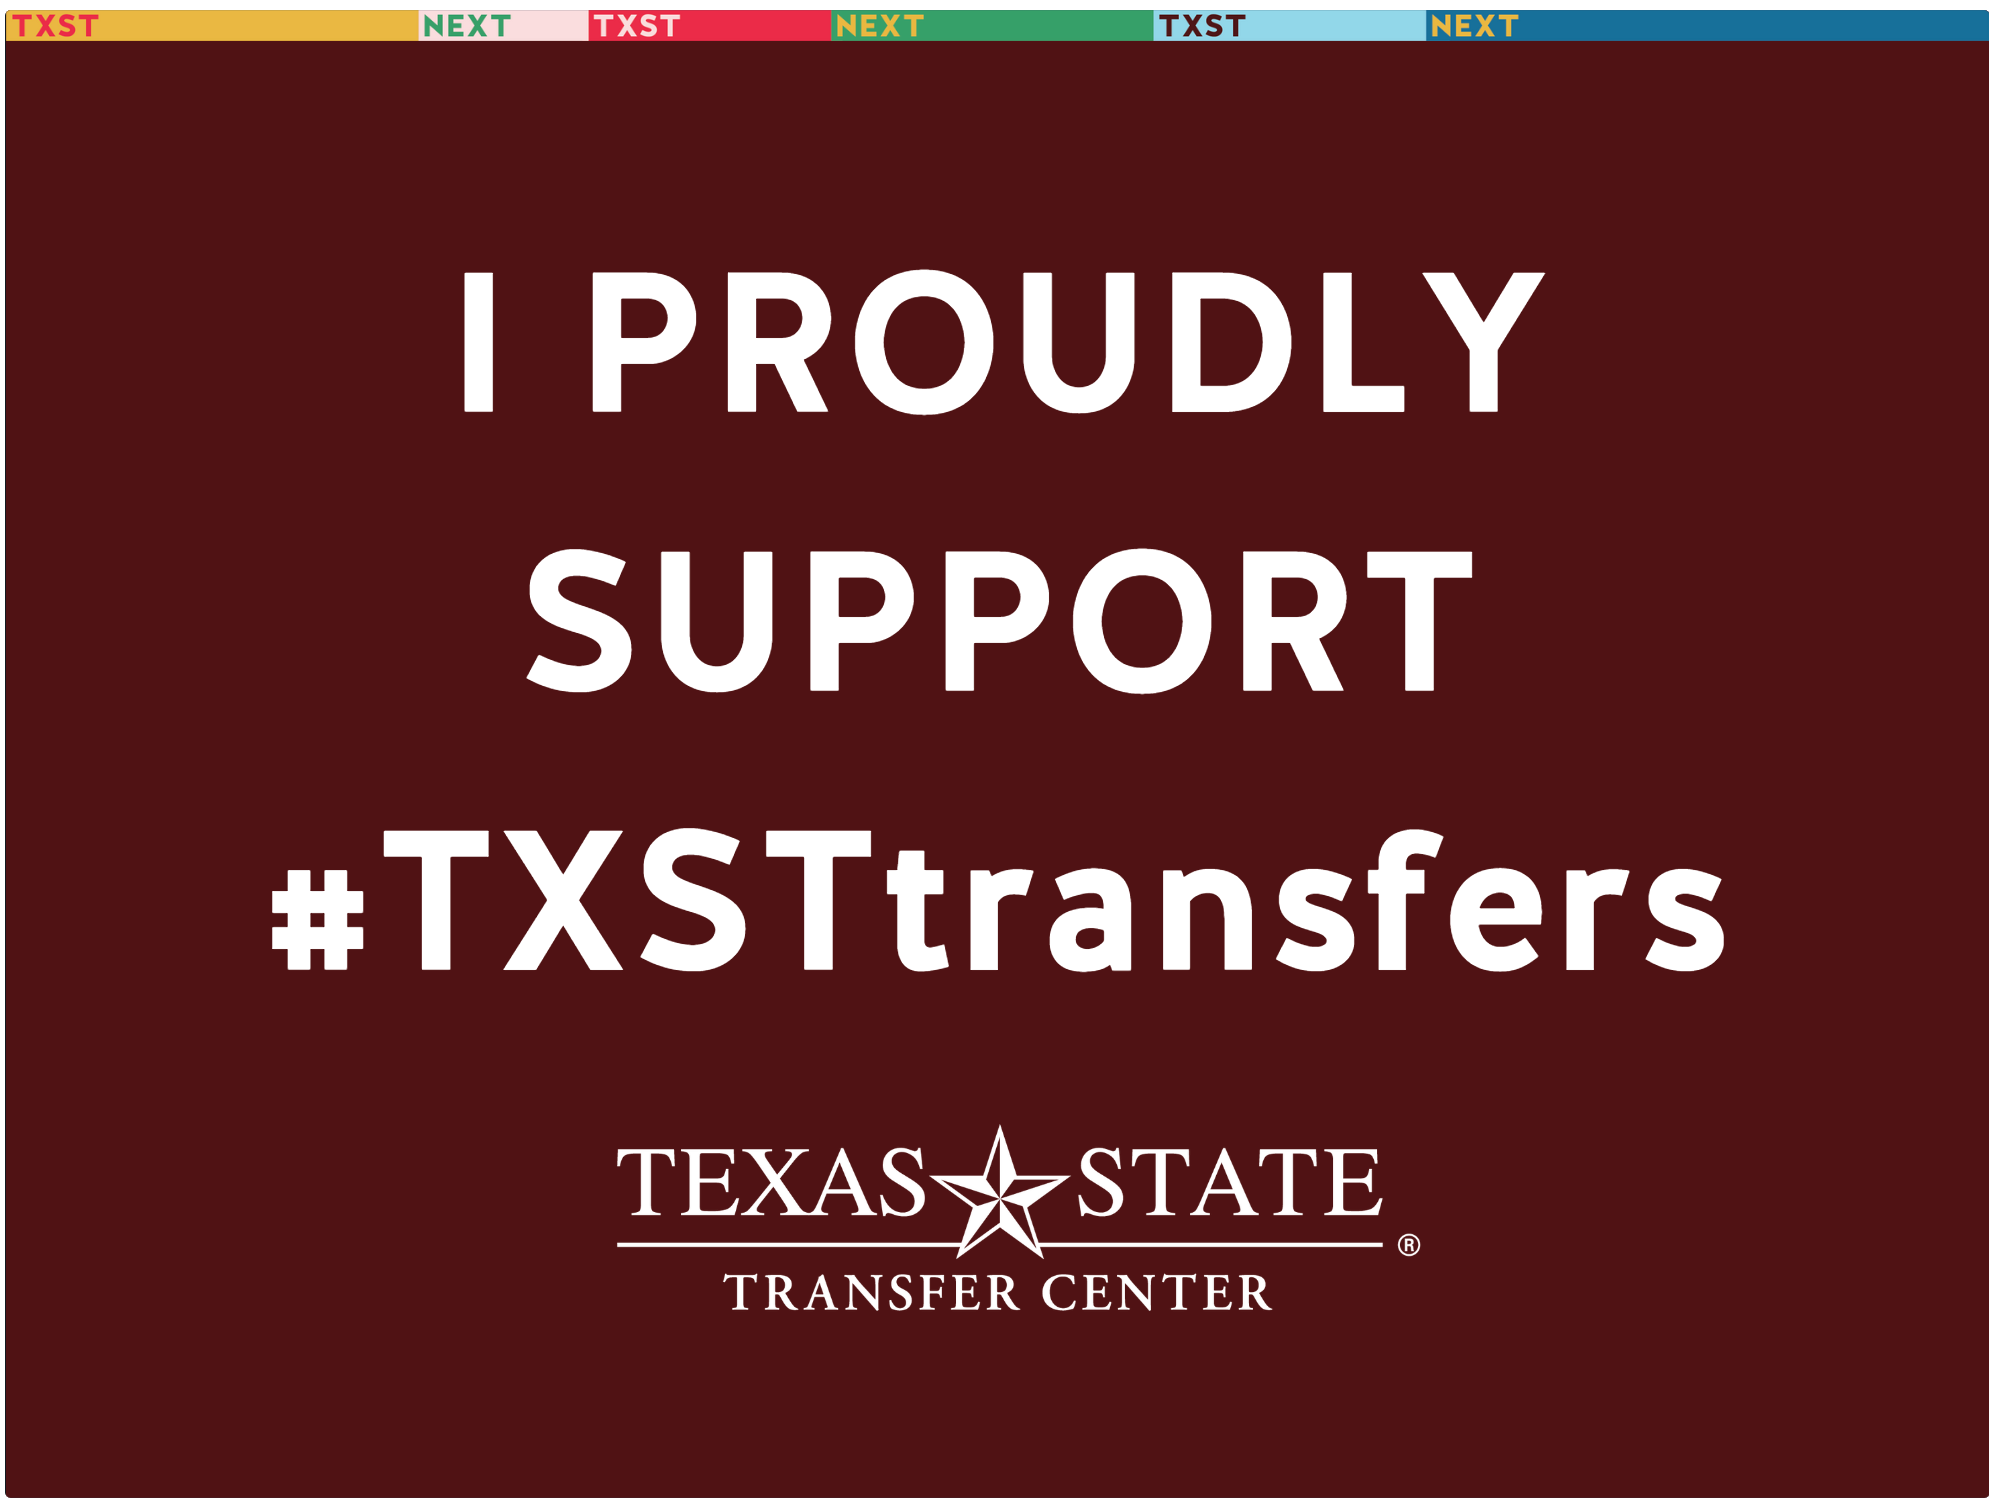 White text overlaying a maroon background that says "I Proudly Support #TXSTtransfers"